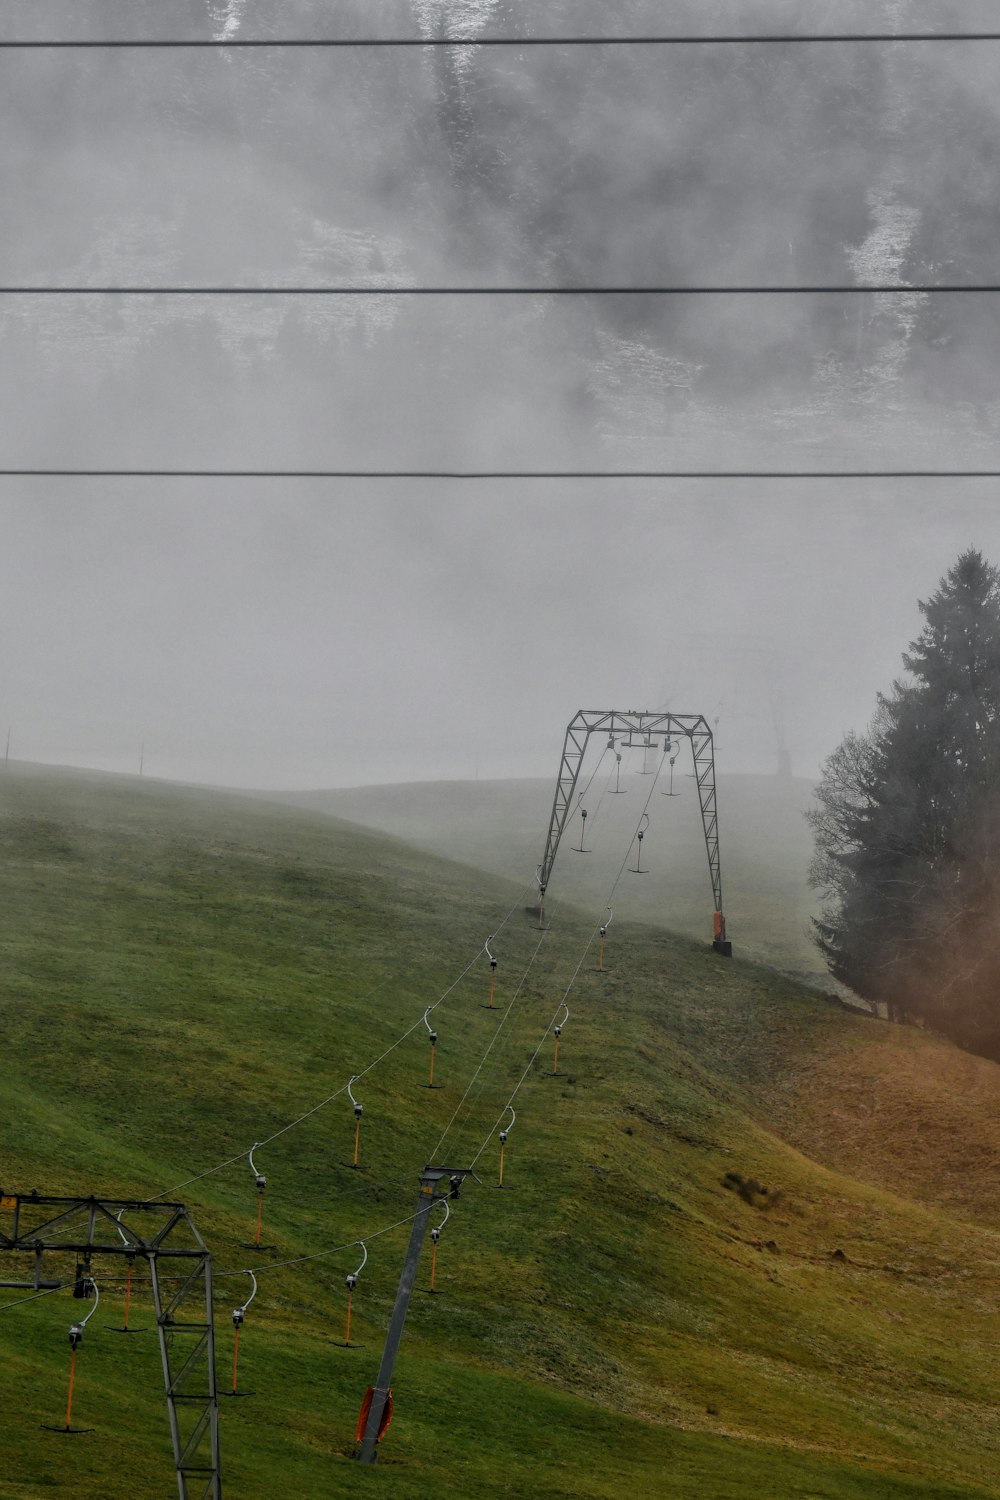 a view of a foggy field with a ski lift in the distance